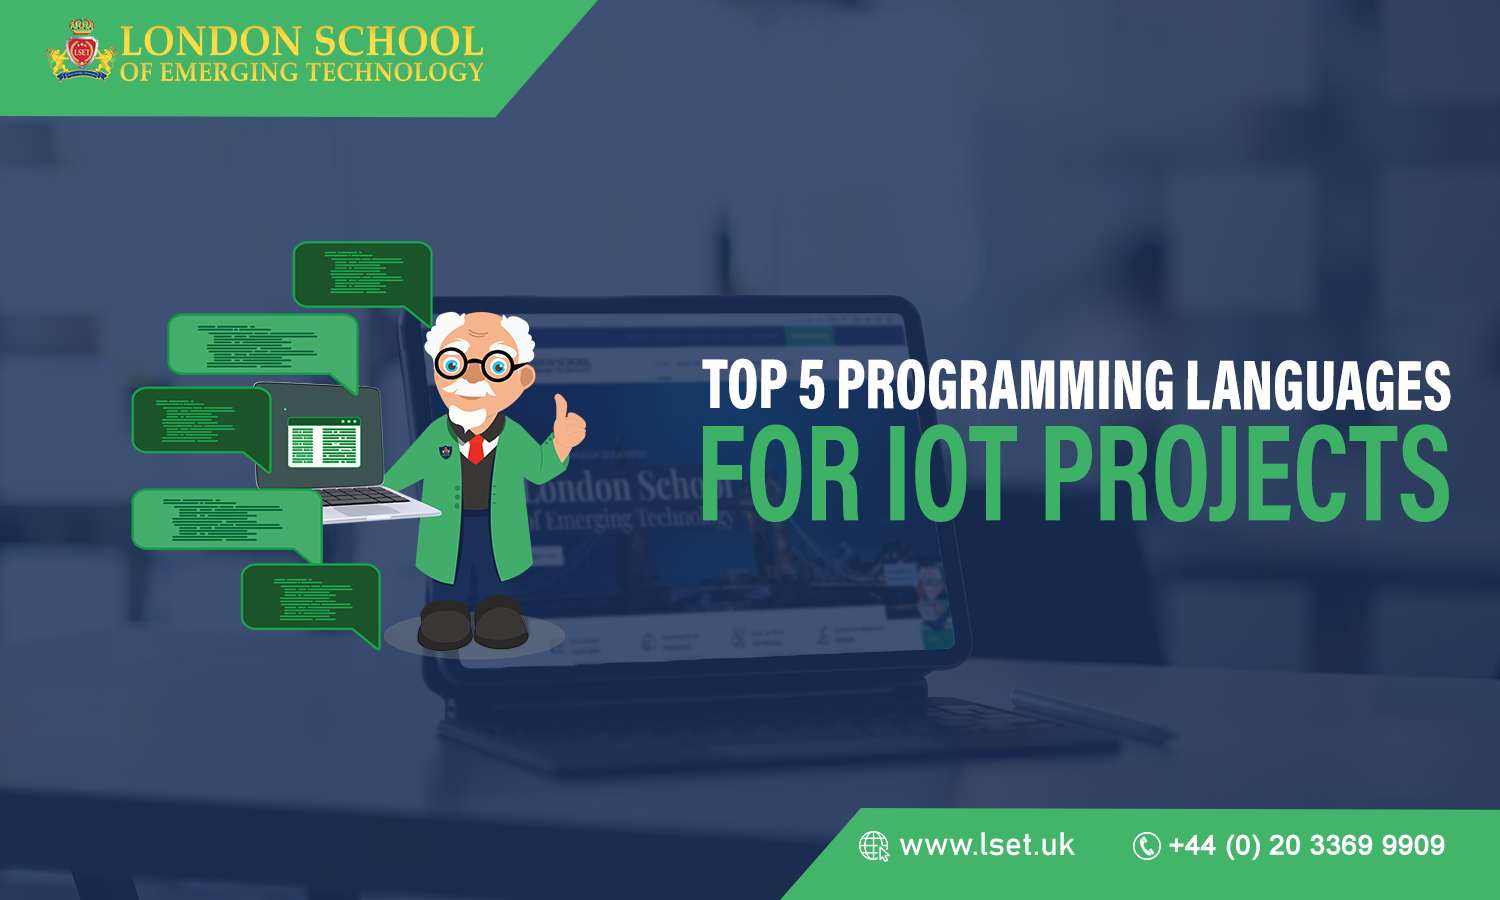 Top 5 Programming Languages for IoT Projects